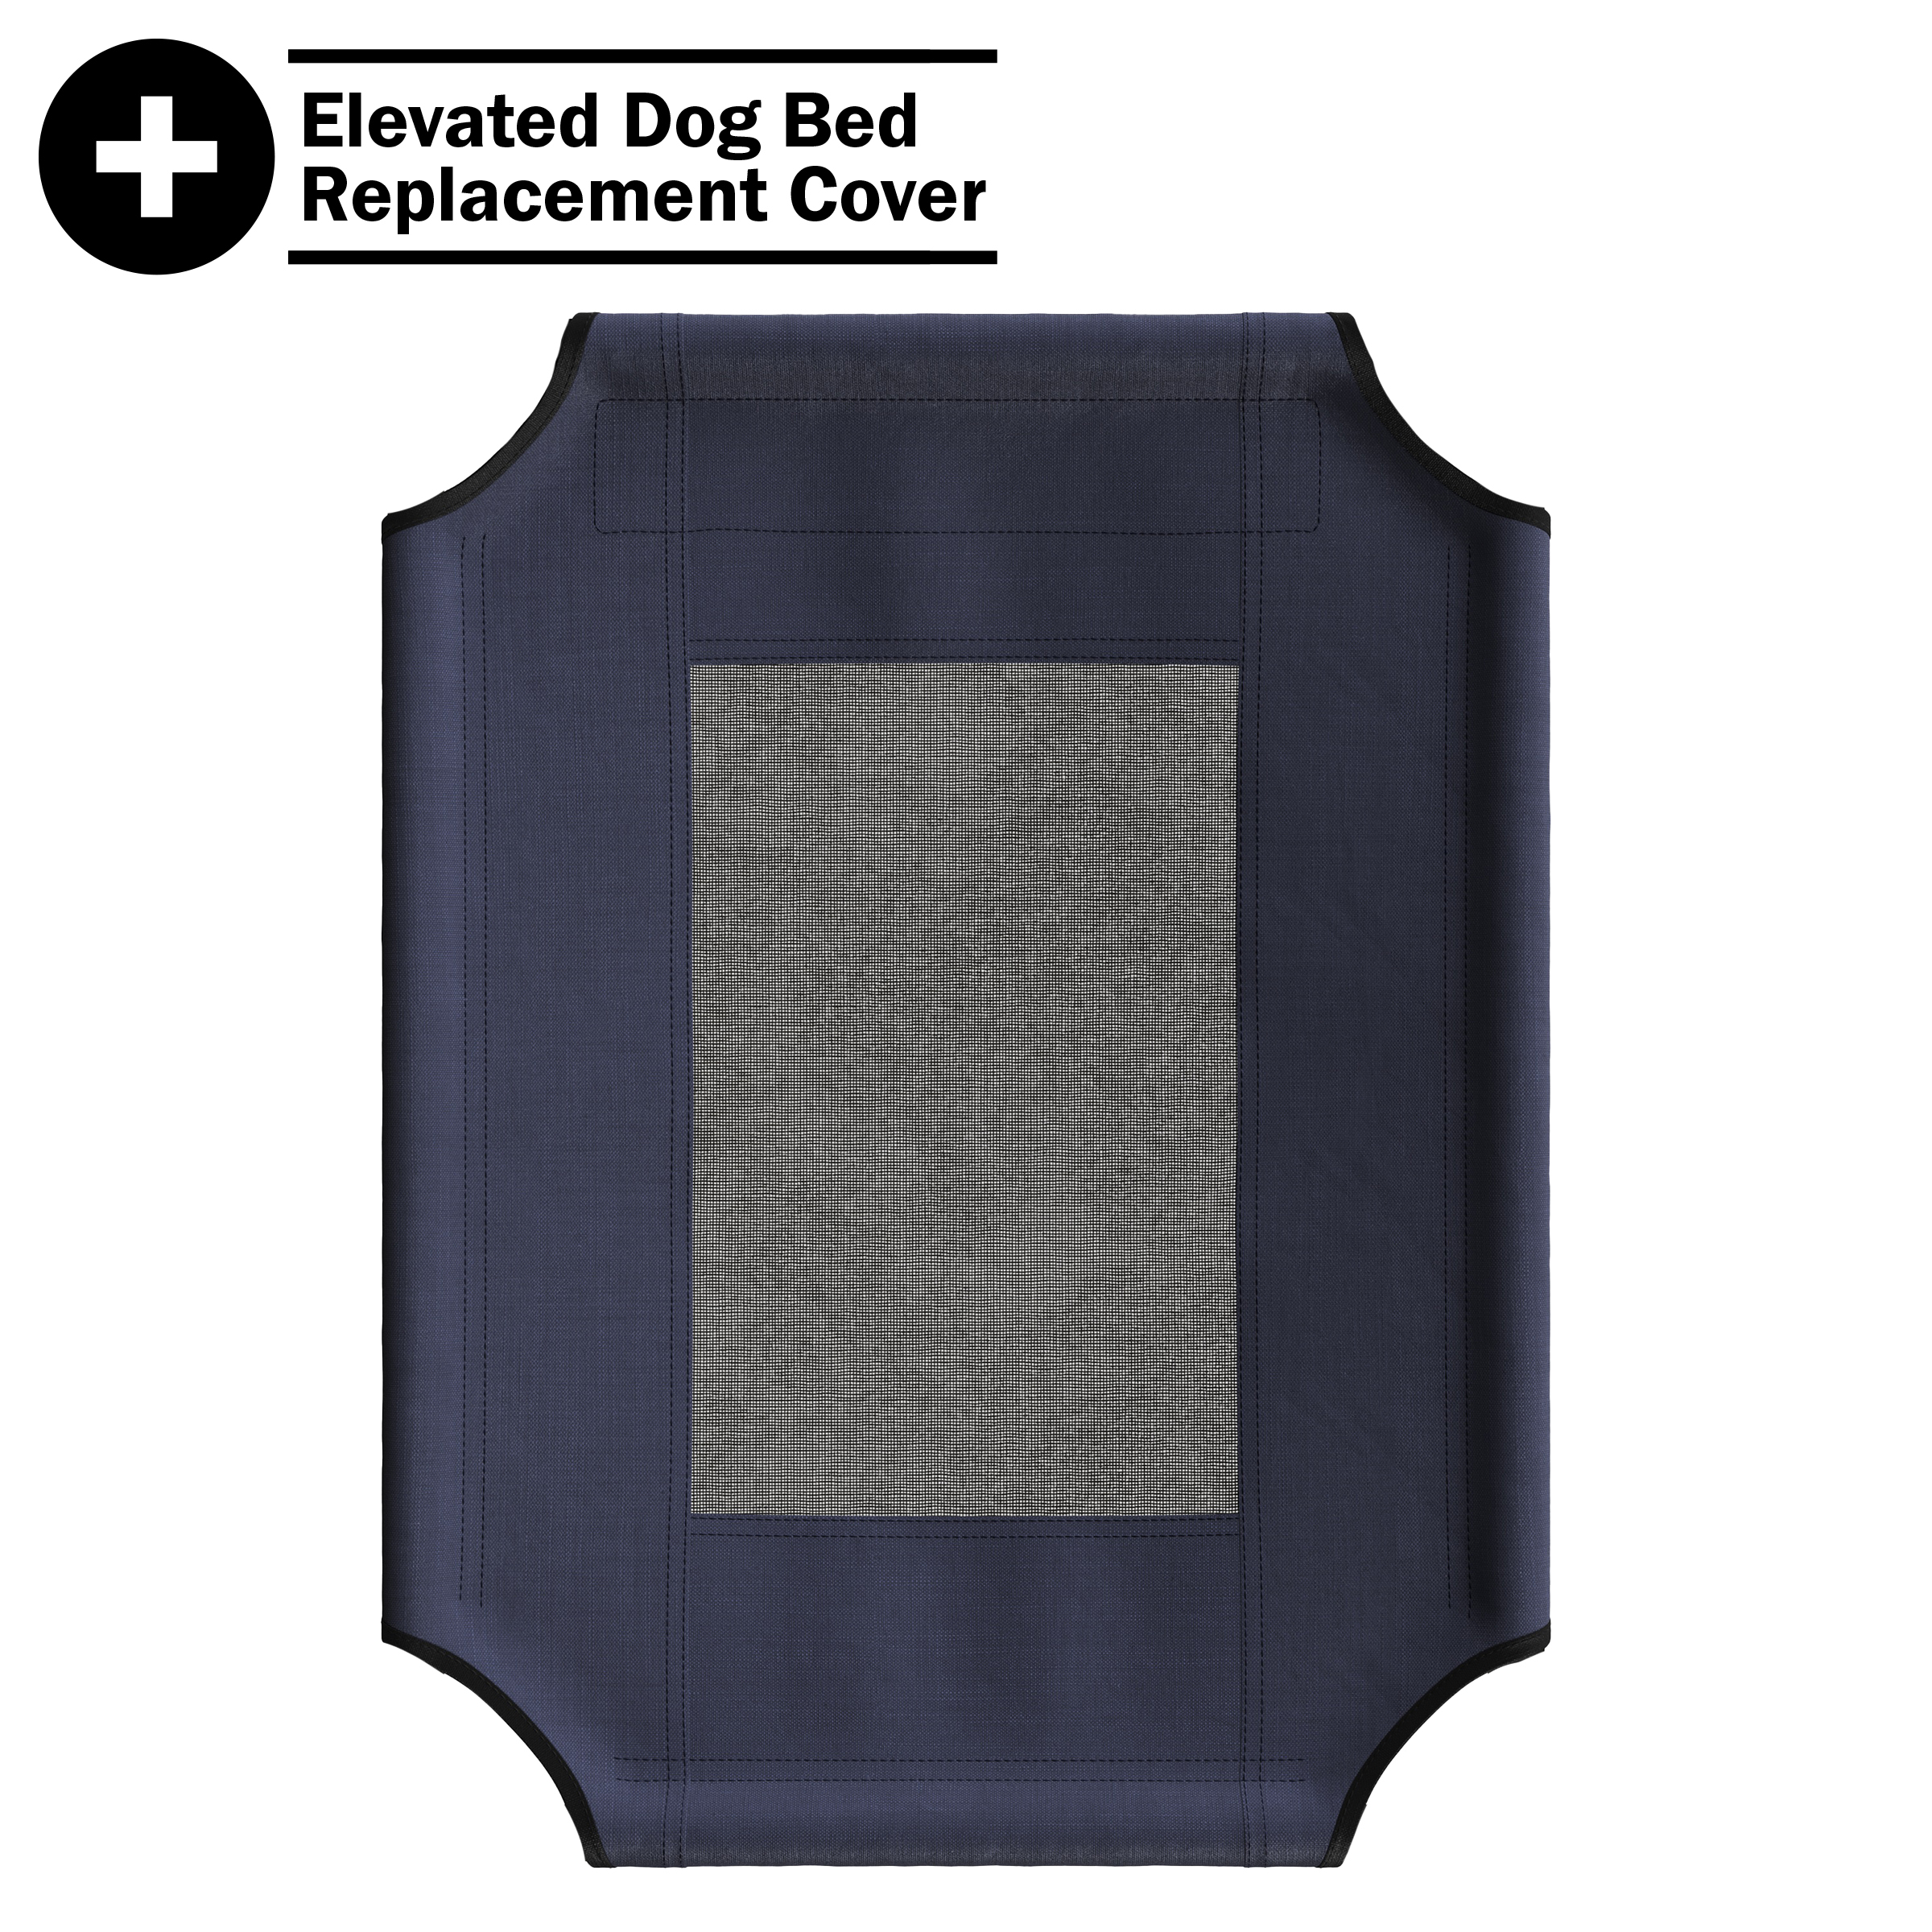 Elevated Dog Bed Cover - 24.5x18.5-Inch Replacement Pet Bed Cover With Mesh Panel - For Indoor/Outdoor Use - Dog Cot Not Included